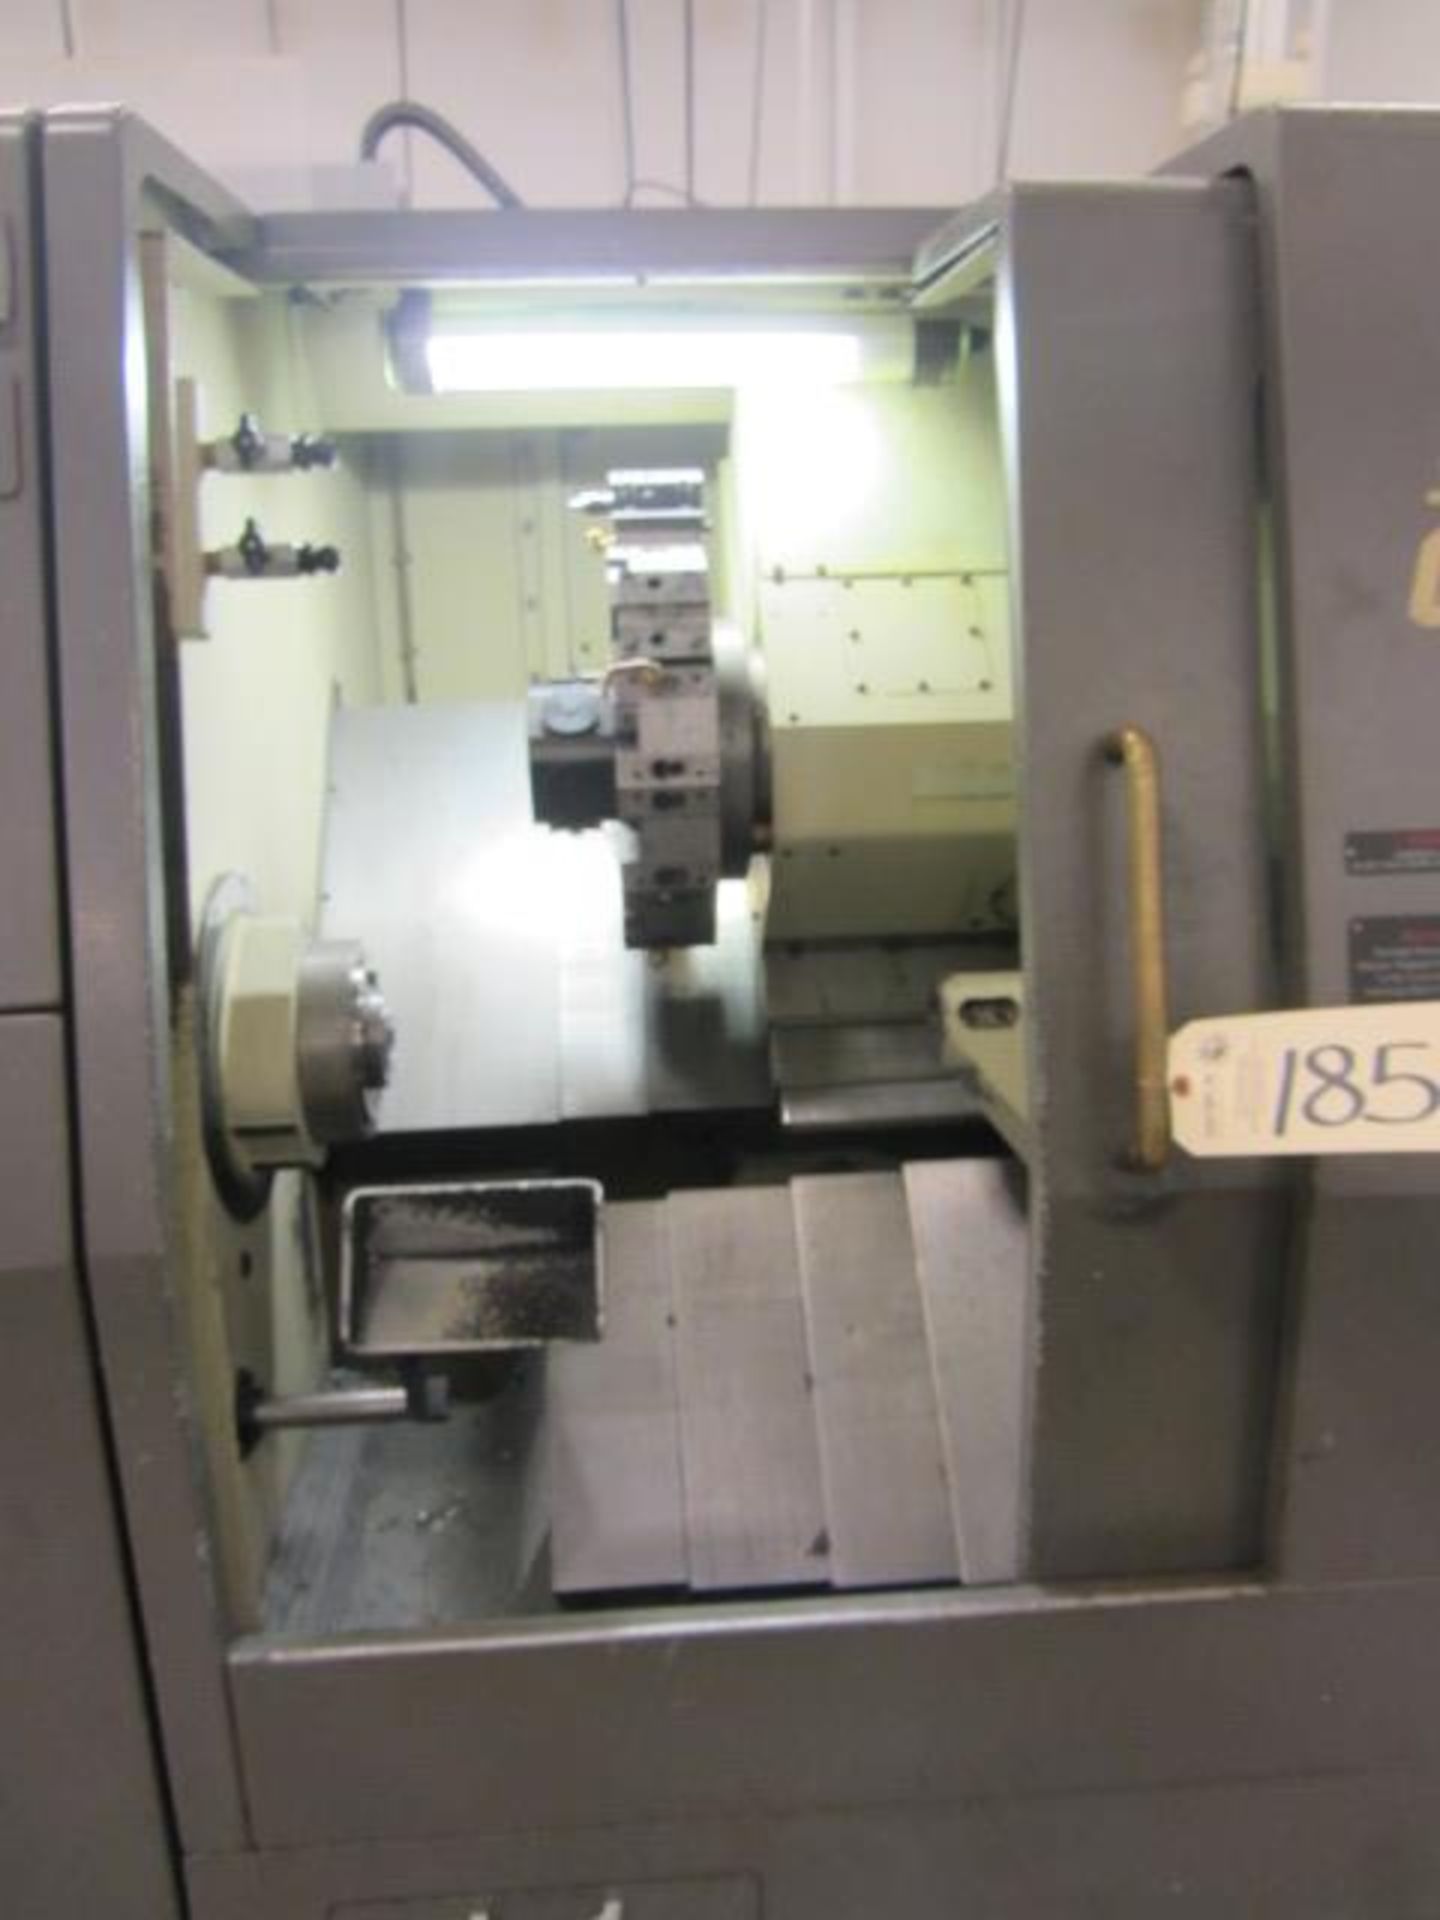 Hardinge Conquest T42SP CNC Turning Center with Sub-Spindle & Milling, Collet Chuck, Main Spindle - Image 6 of 9